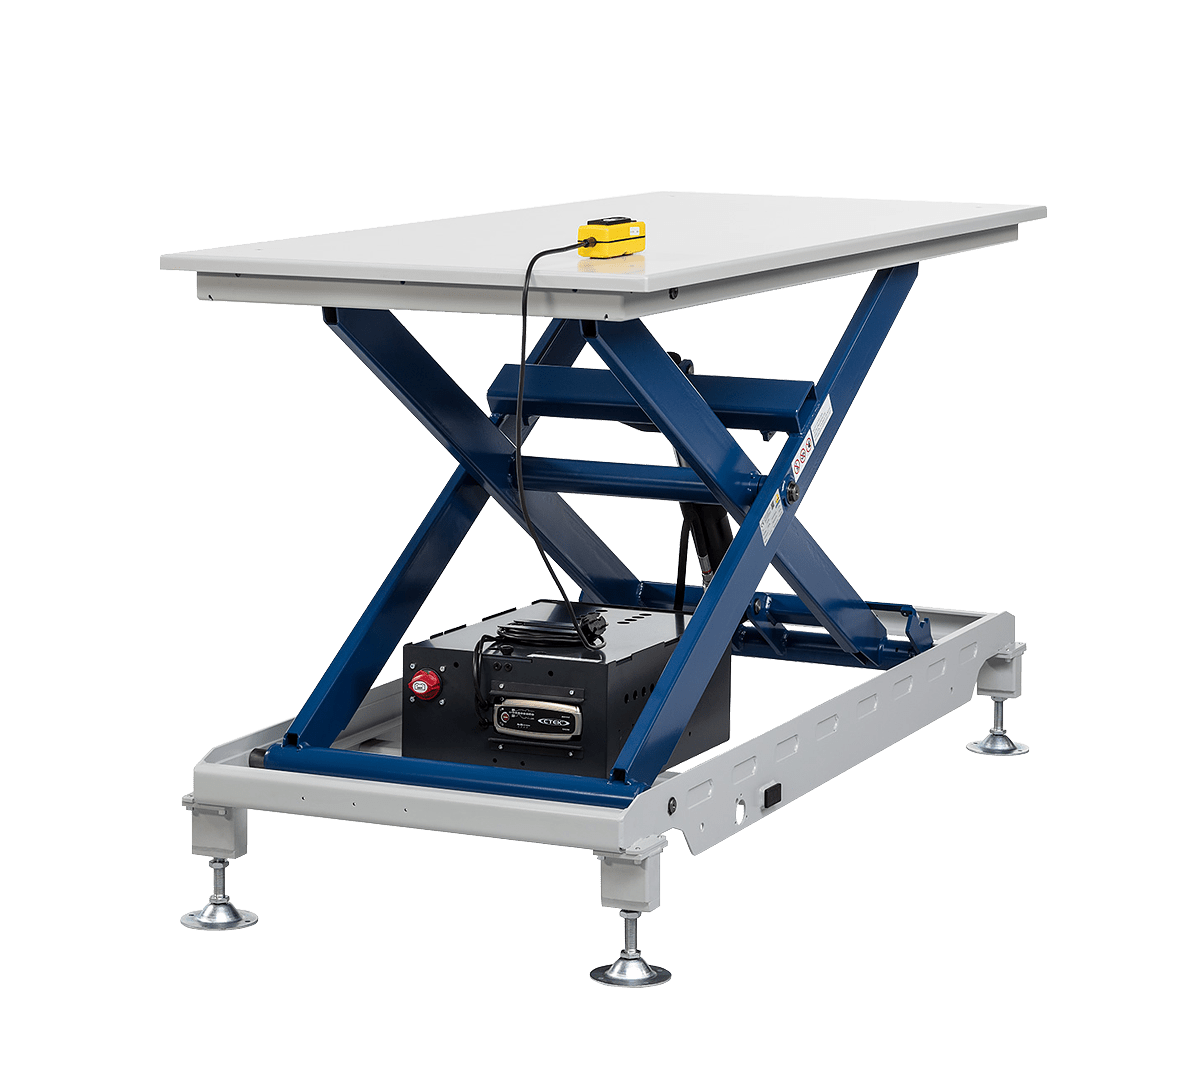 hs600-metal-sheet-plate-battery-hydraulic-lift-tables-beck copy